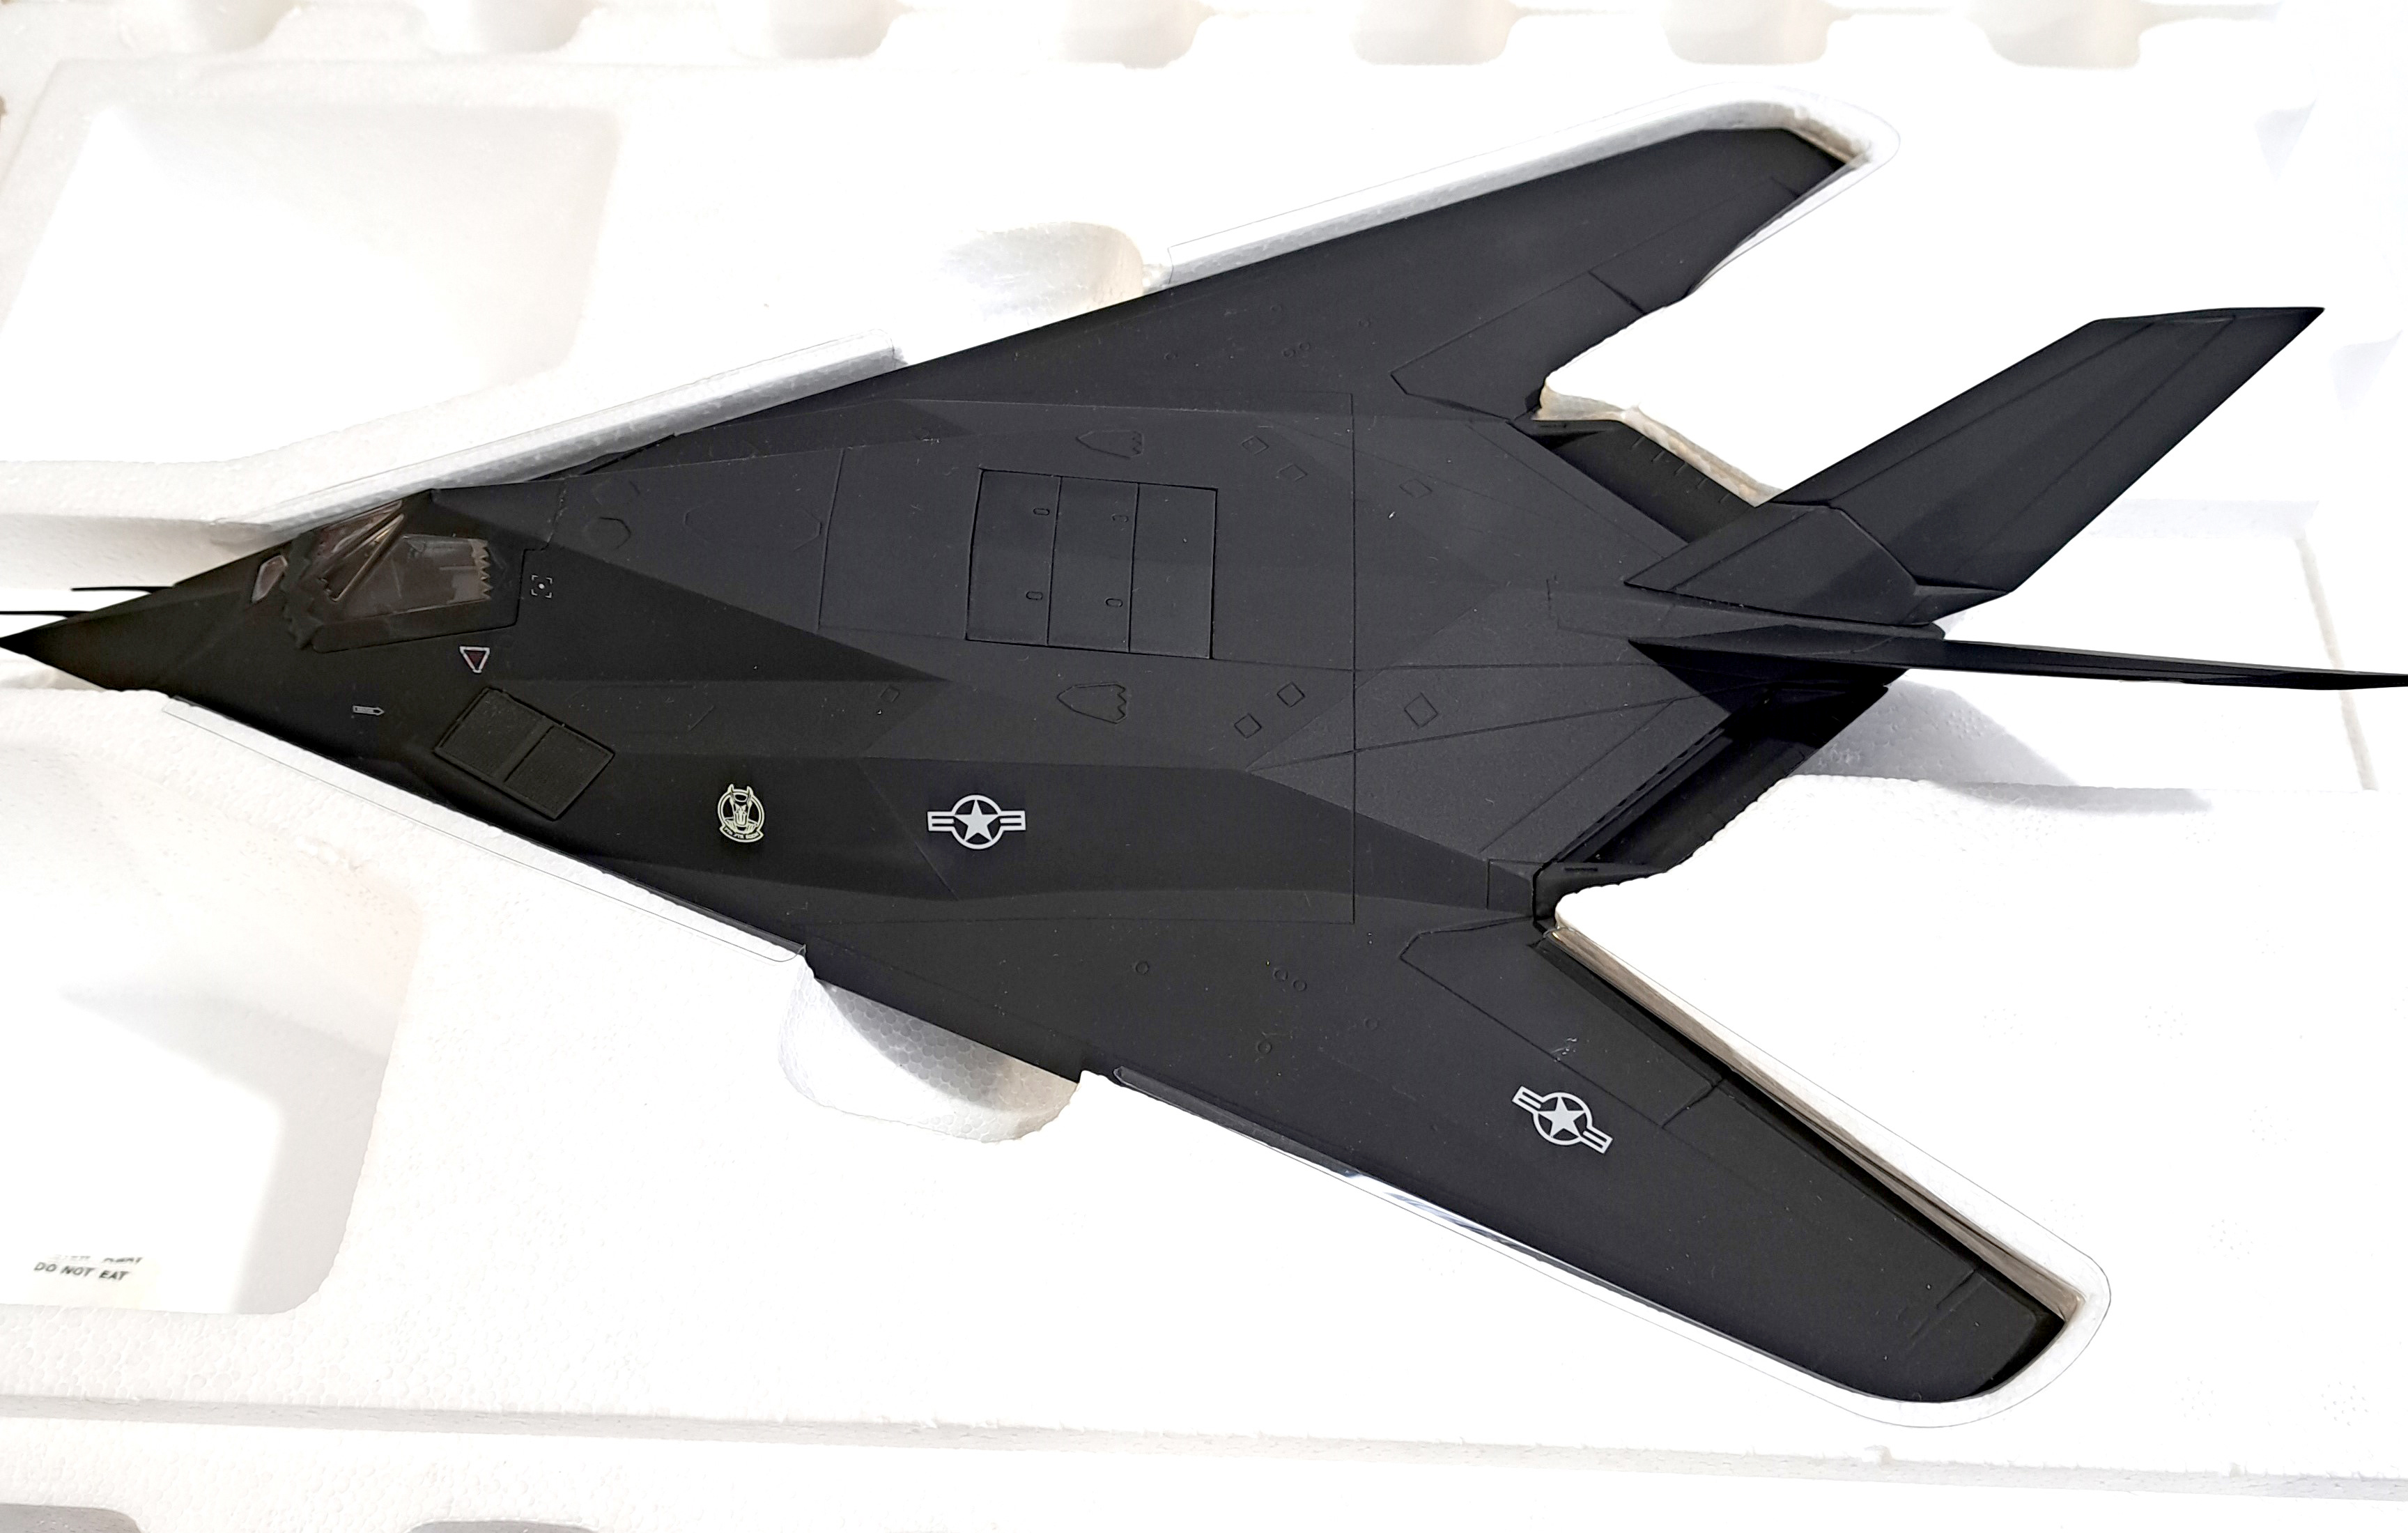 Franklin Mint  "Armour Collection", a boxed pair of 1:48 scaleF117 Stealth Fighter Jets - Image 4 of 4